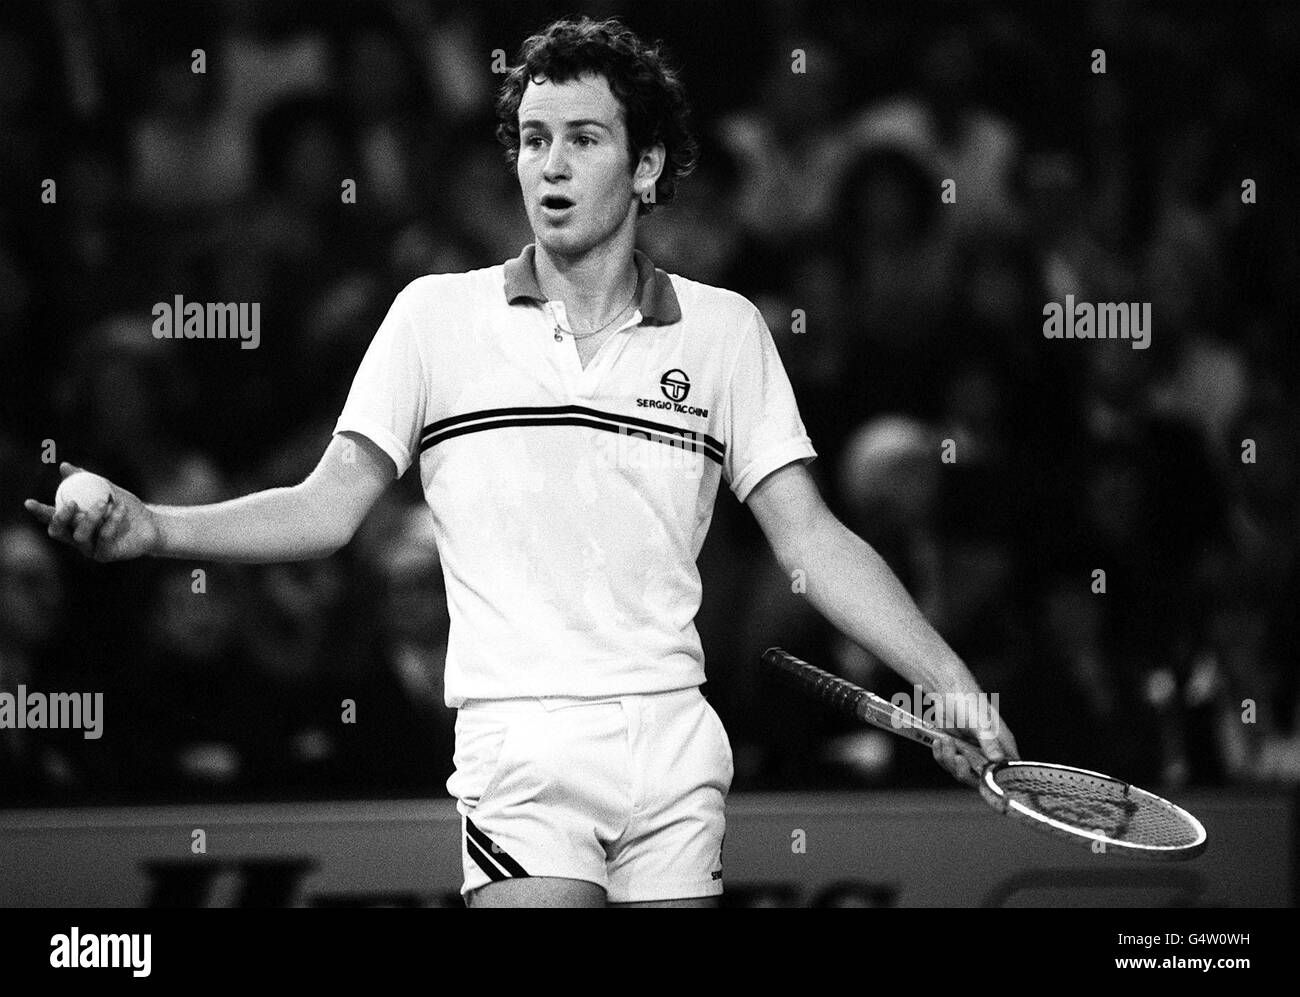 John McEnroe, the temperamental Wimbledon and US Open Champion voicing his opinions at Wembley Arena during a tennis match against fellow American Jimmy Connors. Stock Photo